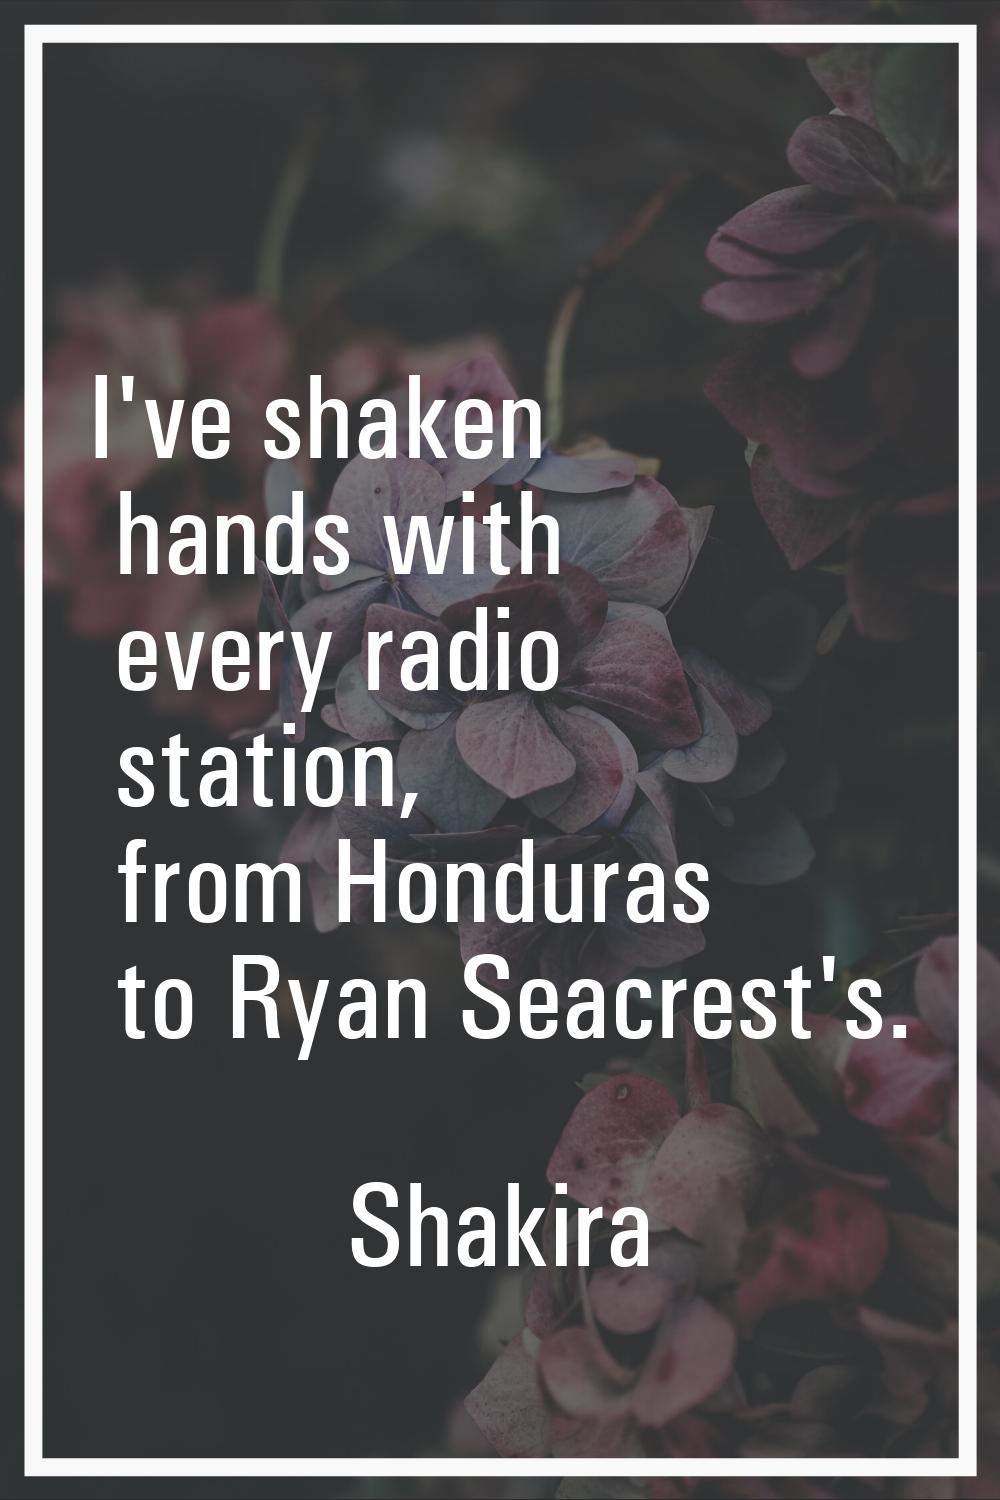 I've shaken hands with every radio station, from Honduras to Ryan Seacrest's.